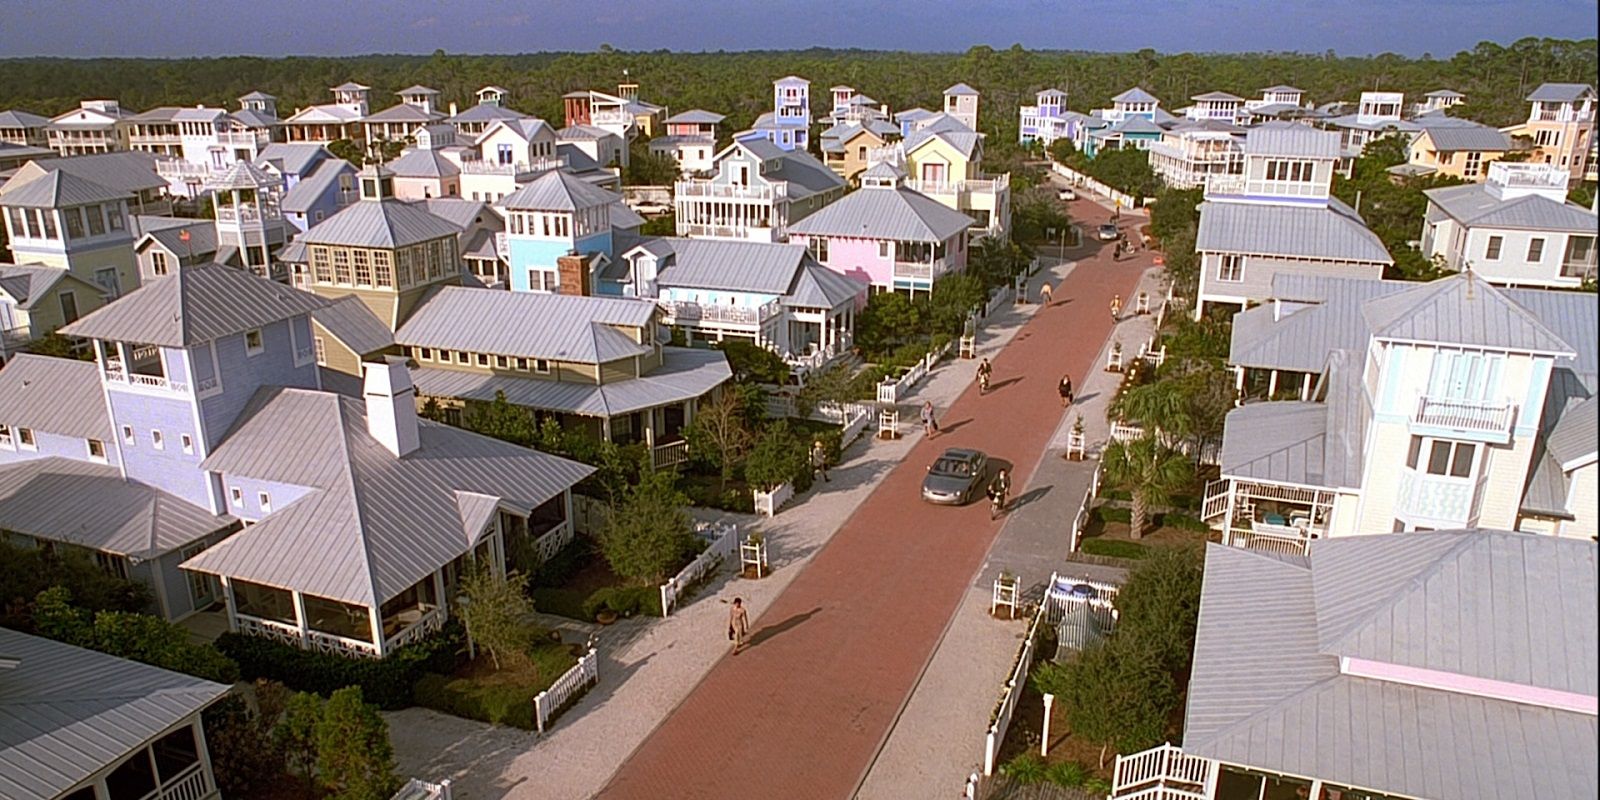 The town of Seahaven in The Truman Show